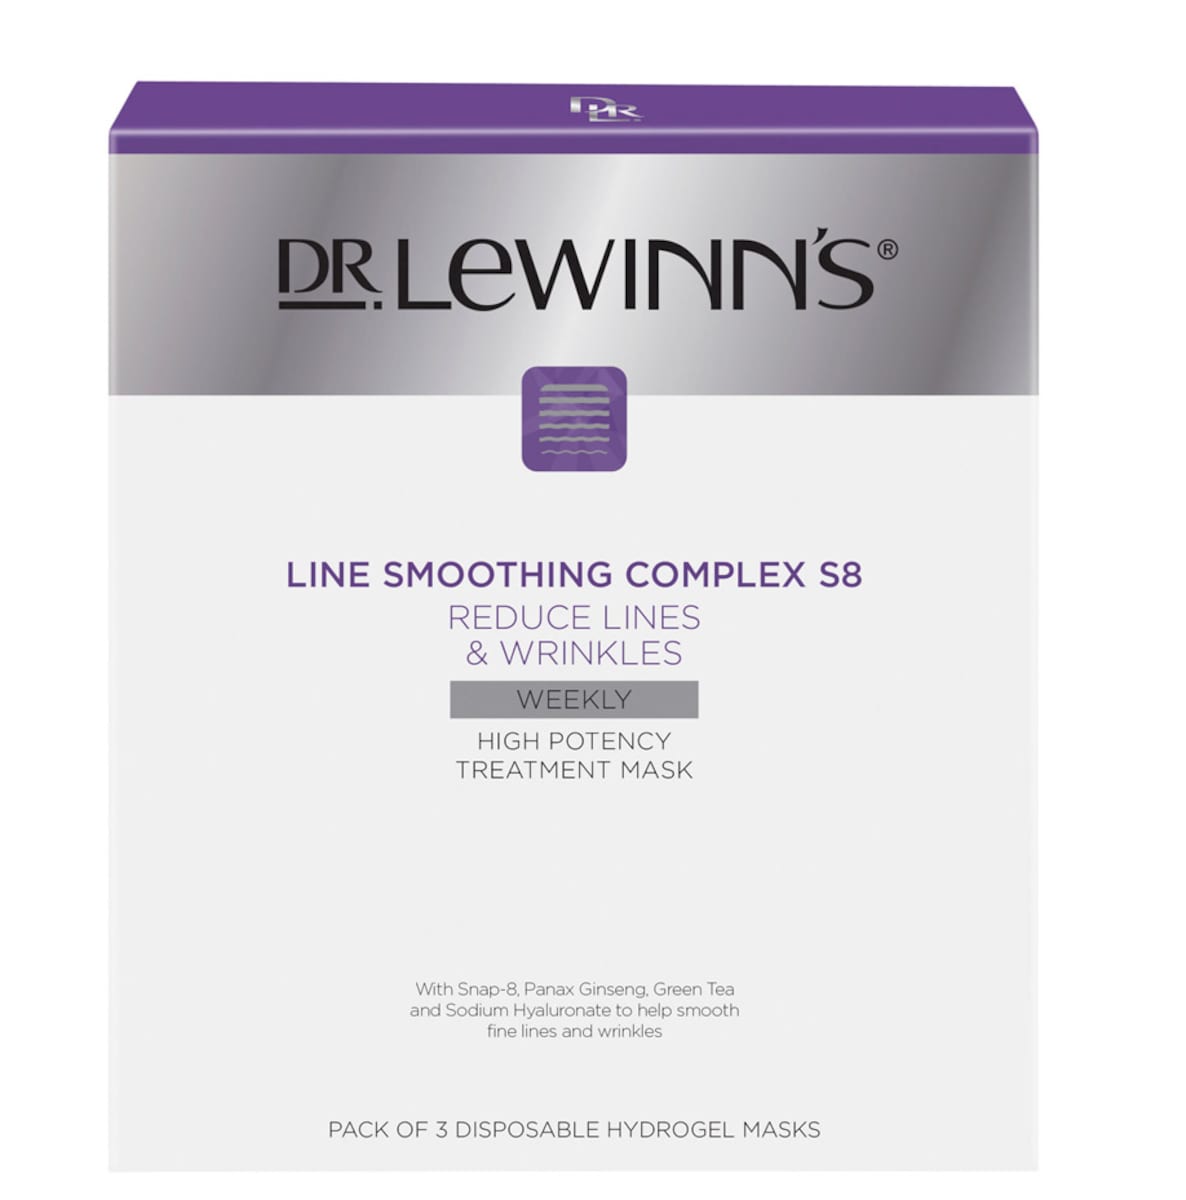 Dr Lewinns Line Smoothing Complex S8 Treatment Mask x 3